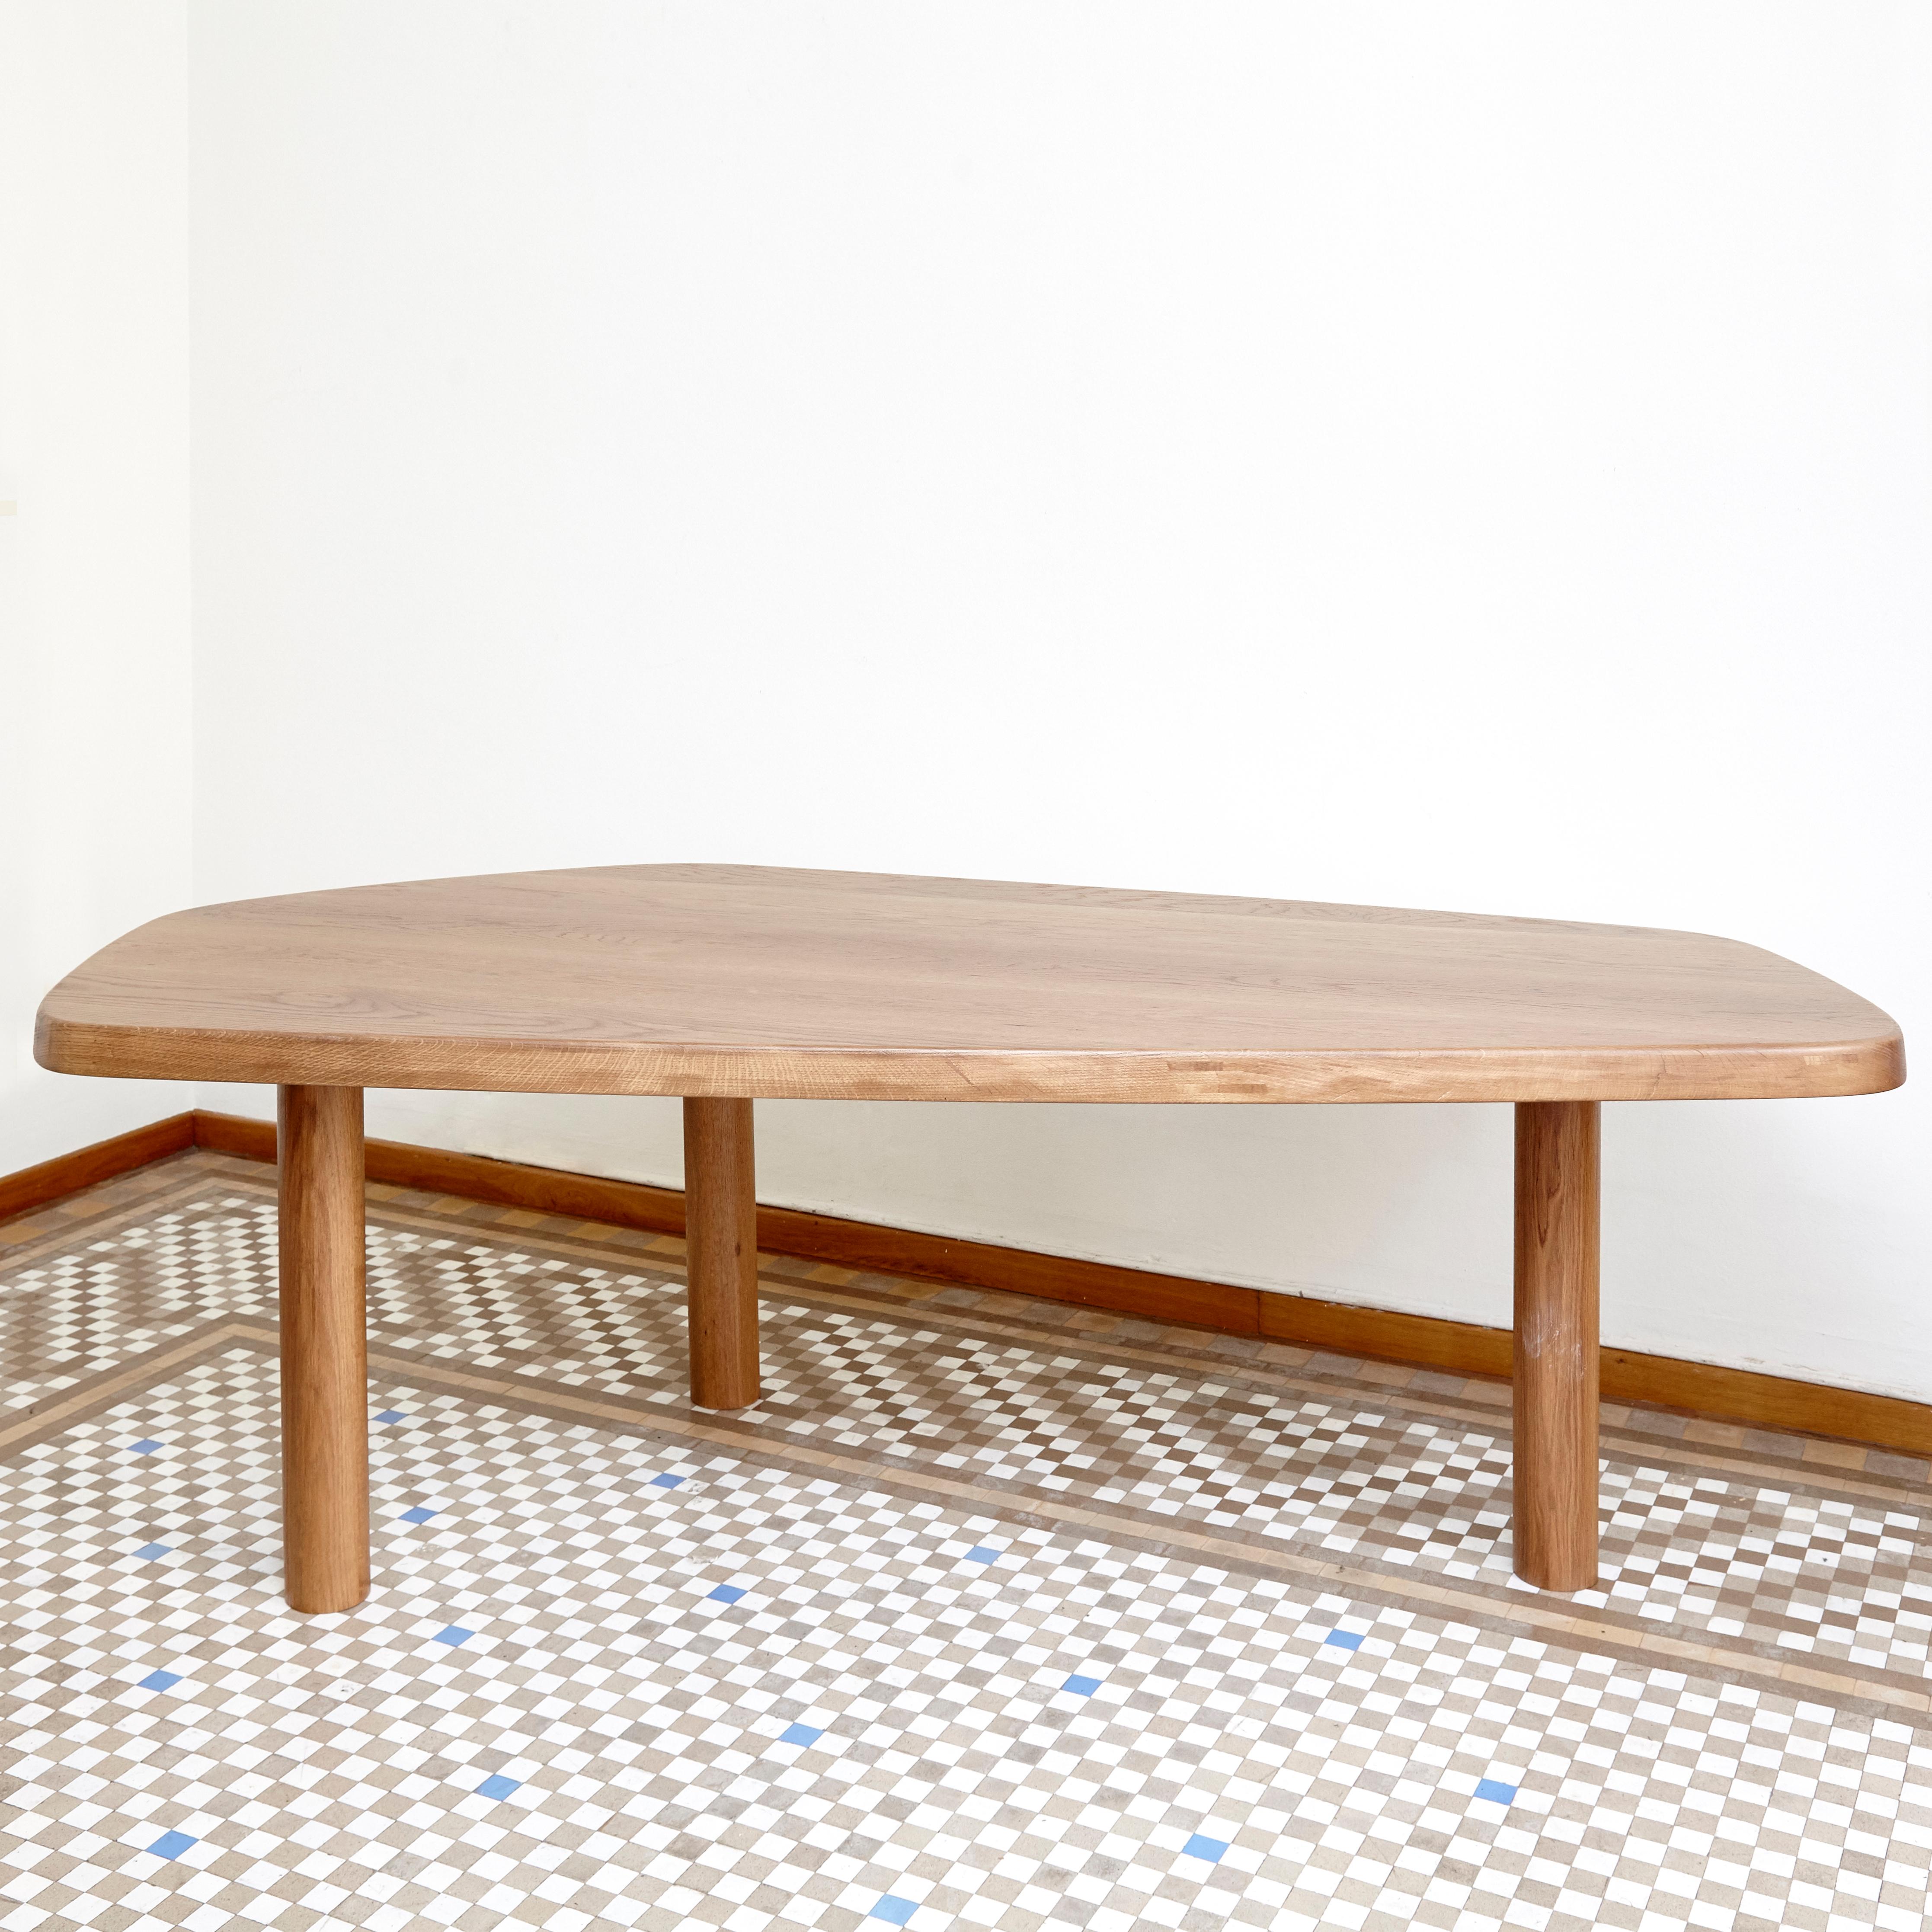 Large freeform dining table by dada - est. manufactured in Barcelona, 2017.

Oak

Measures: 112.5 cm D x 220 cm W x 75 cm H 

Production delay: 6-8 weeks

There is the possibility of making it in different measures.


Dada Est. / Makes a